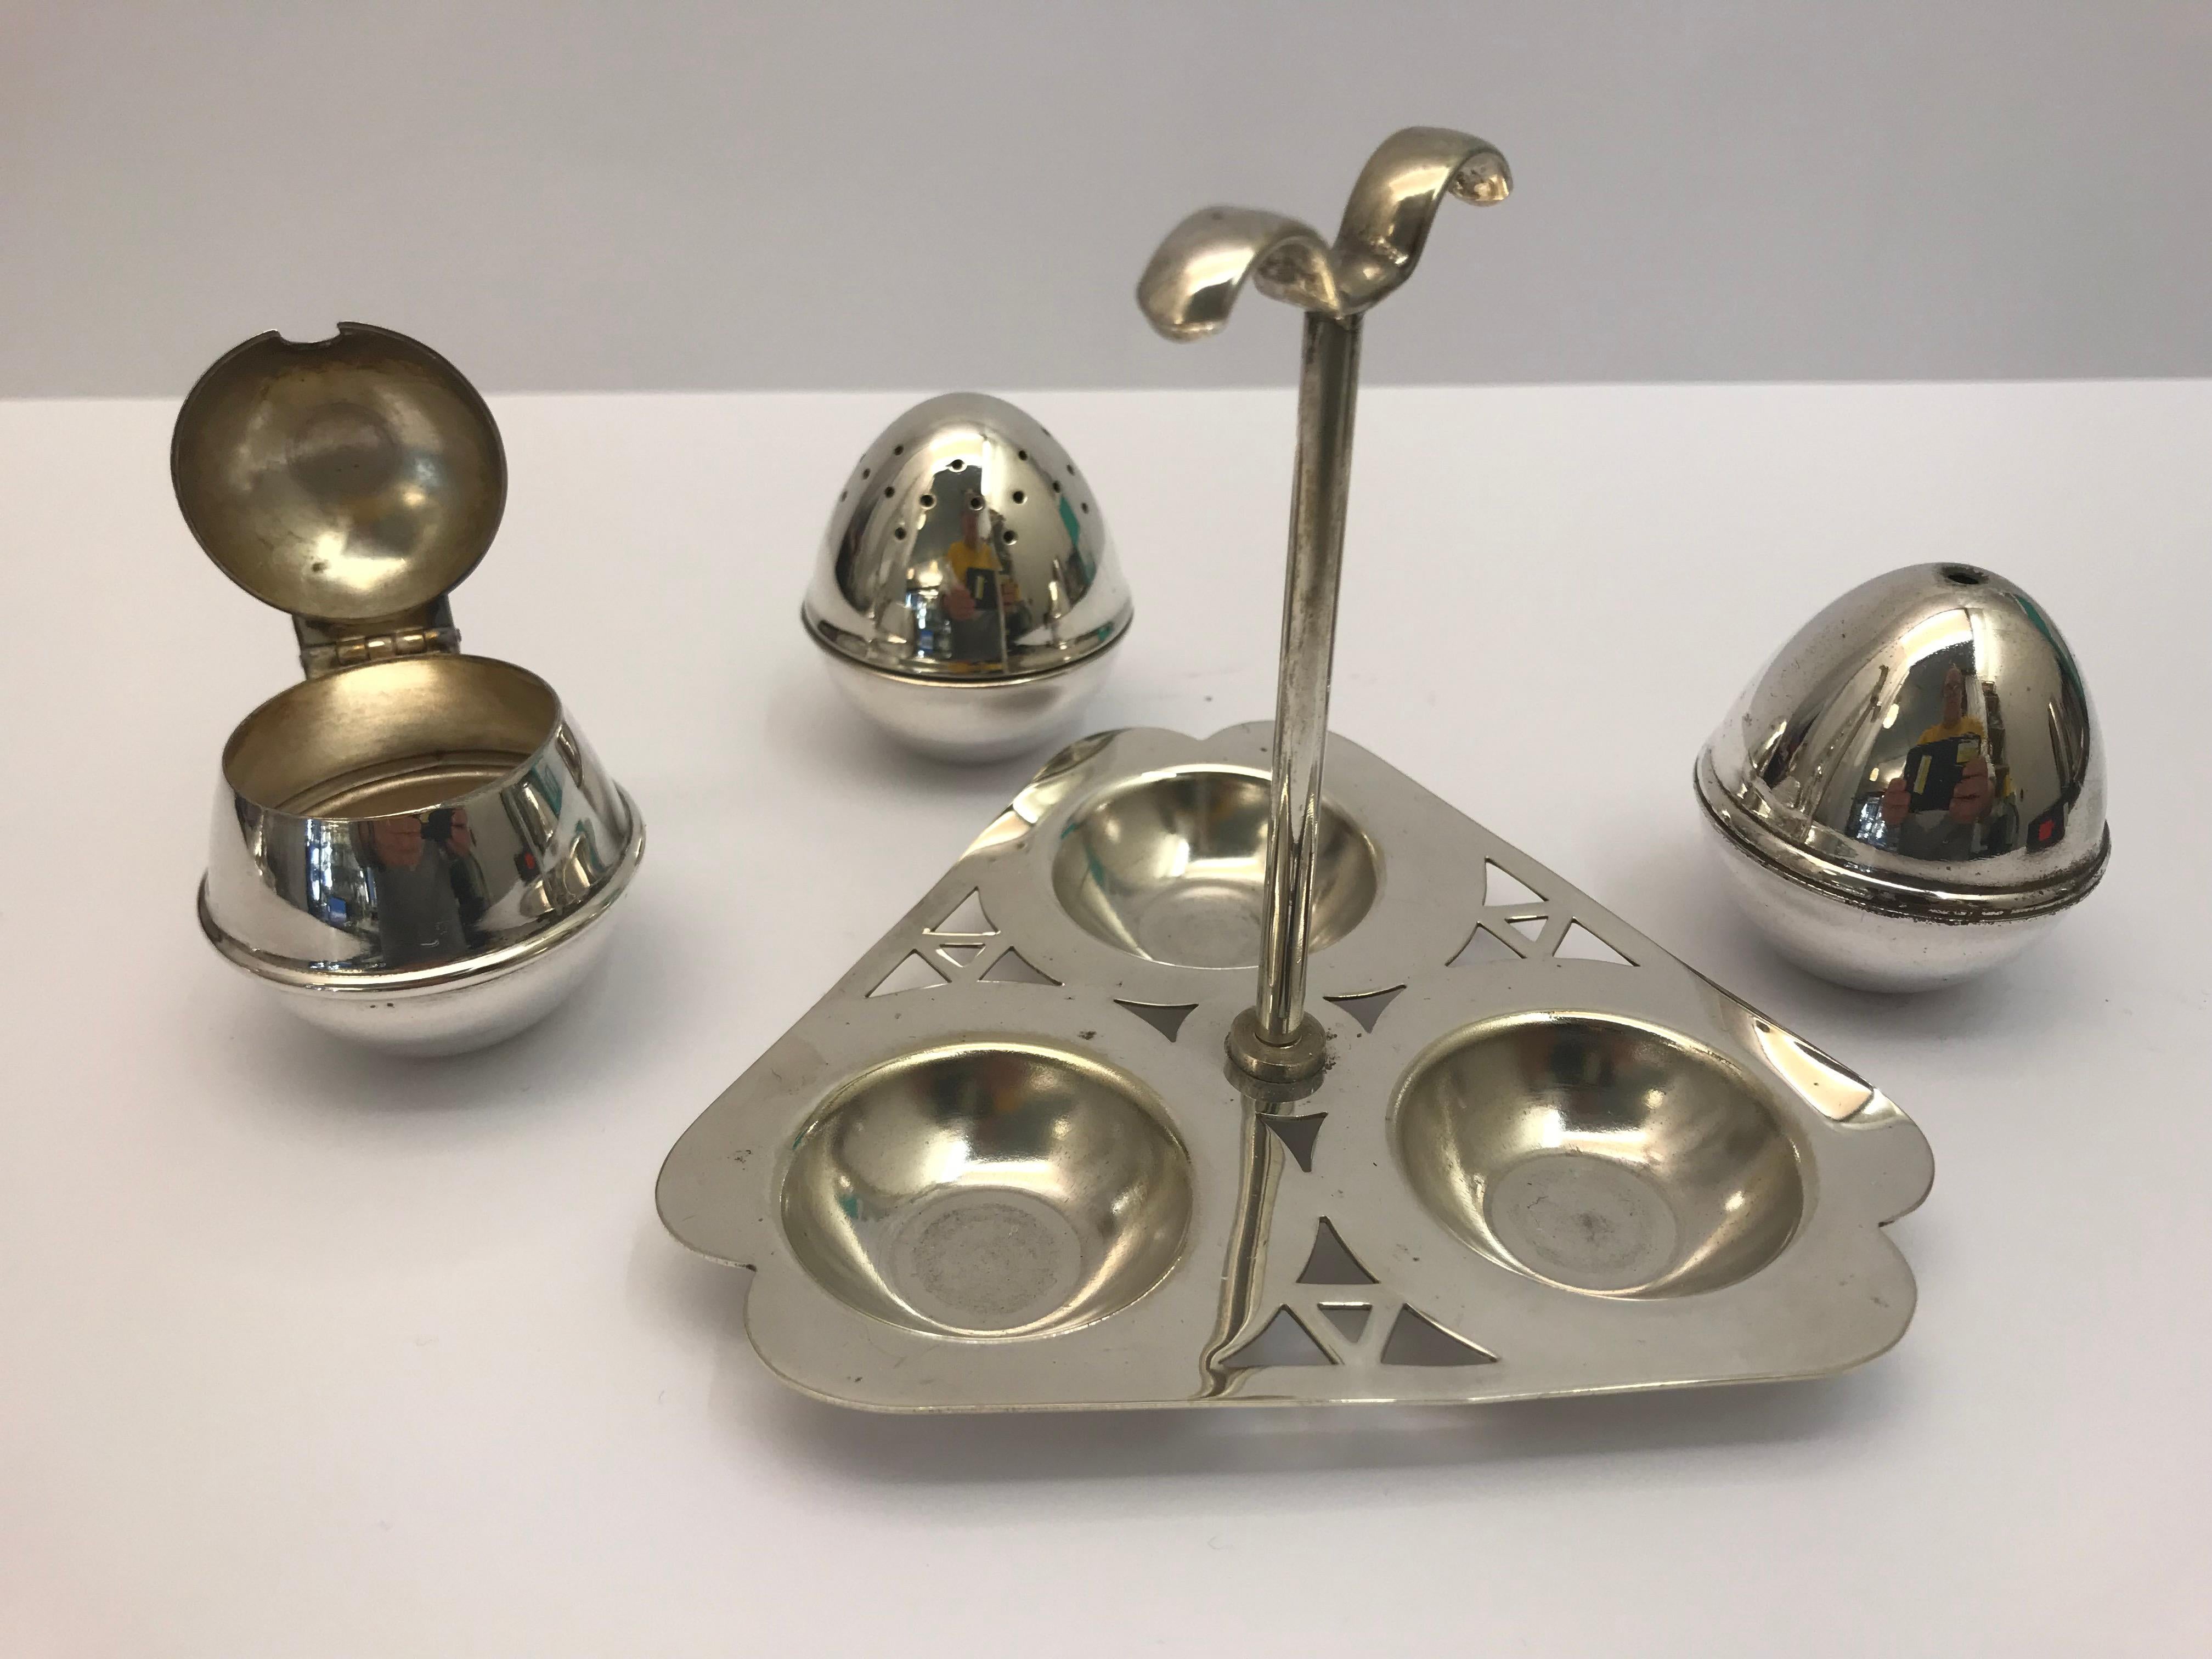 Silver plated condiment set comprising of a salt a pepper and a Mustard pot standing on a triangular pierced frame.
 
Made in England, circa 1930 
Stands 9.5 cm tall.